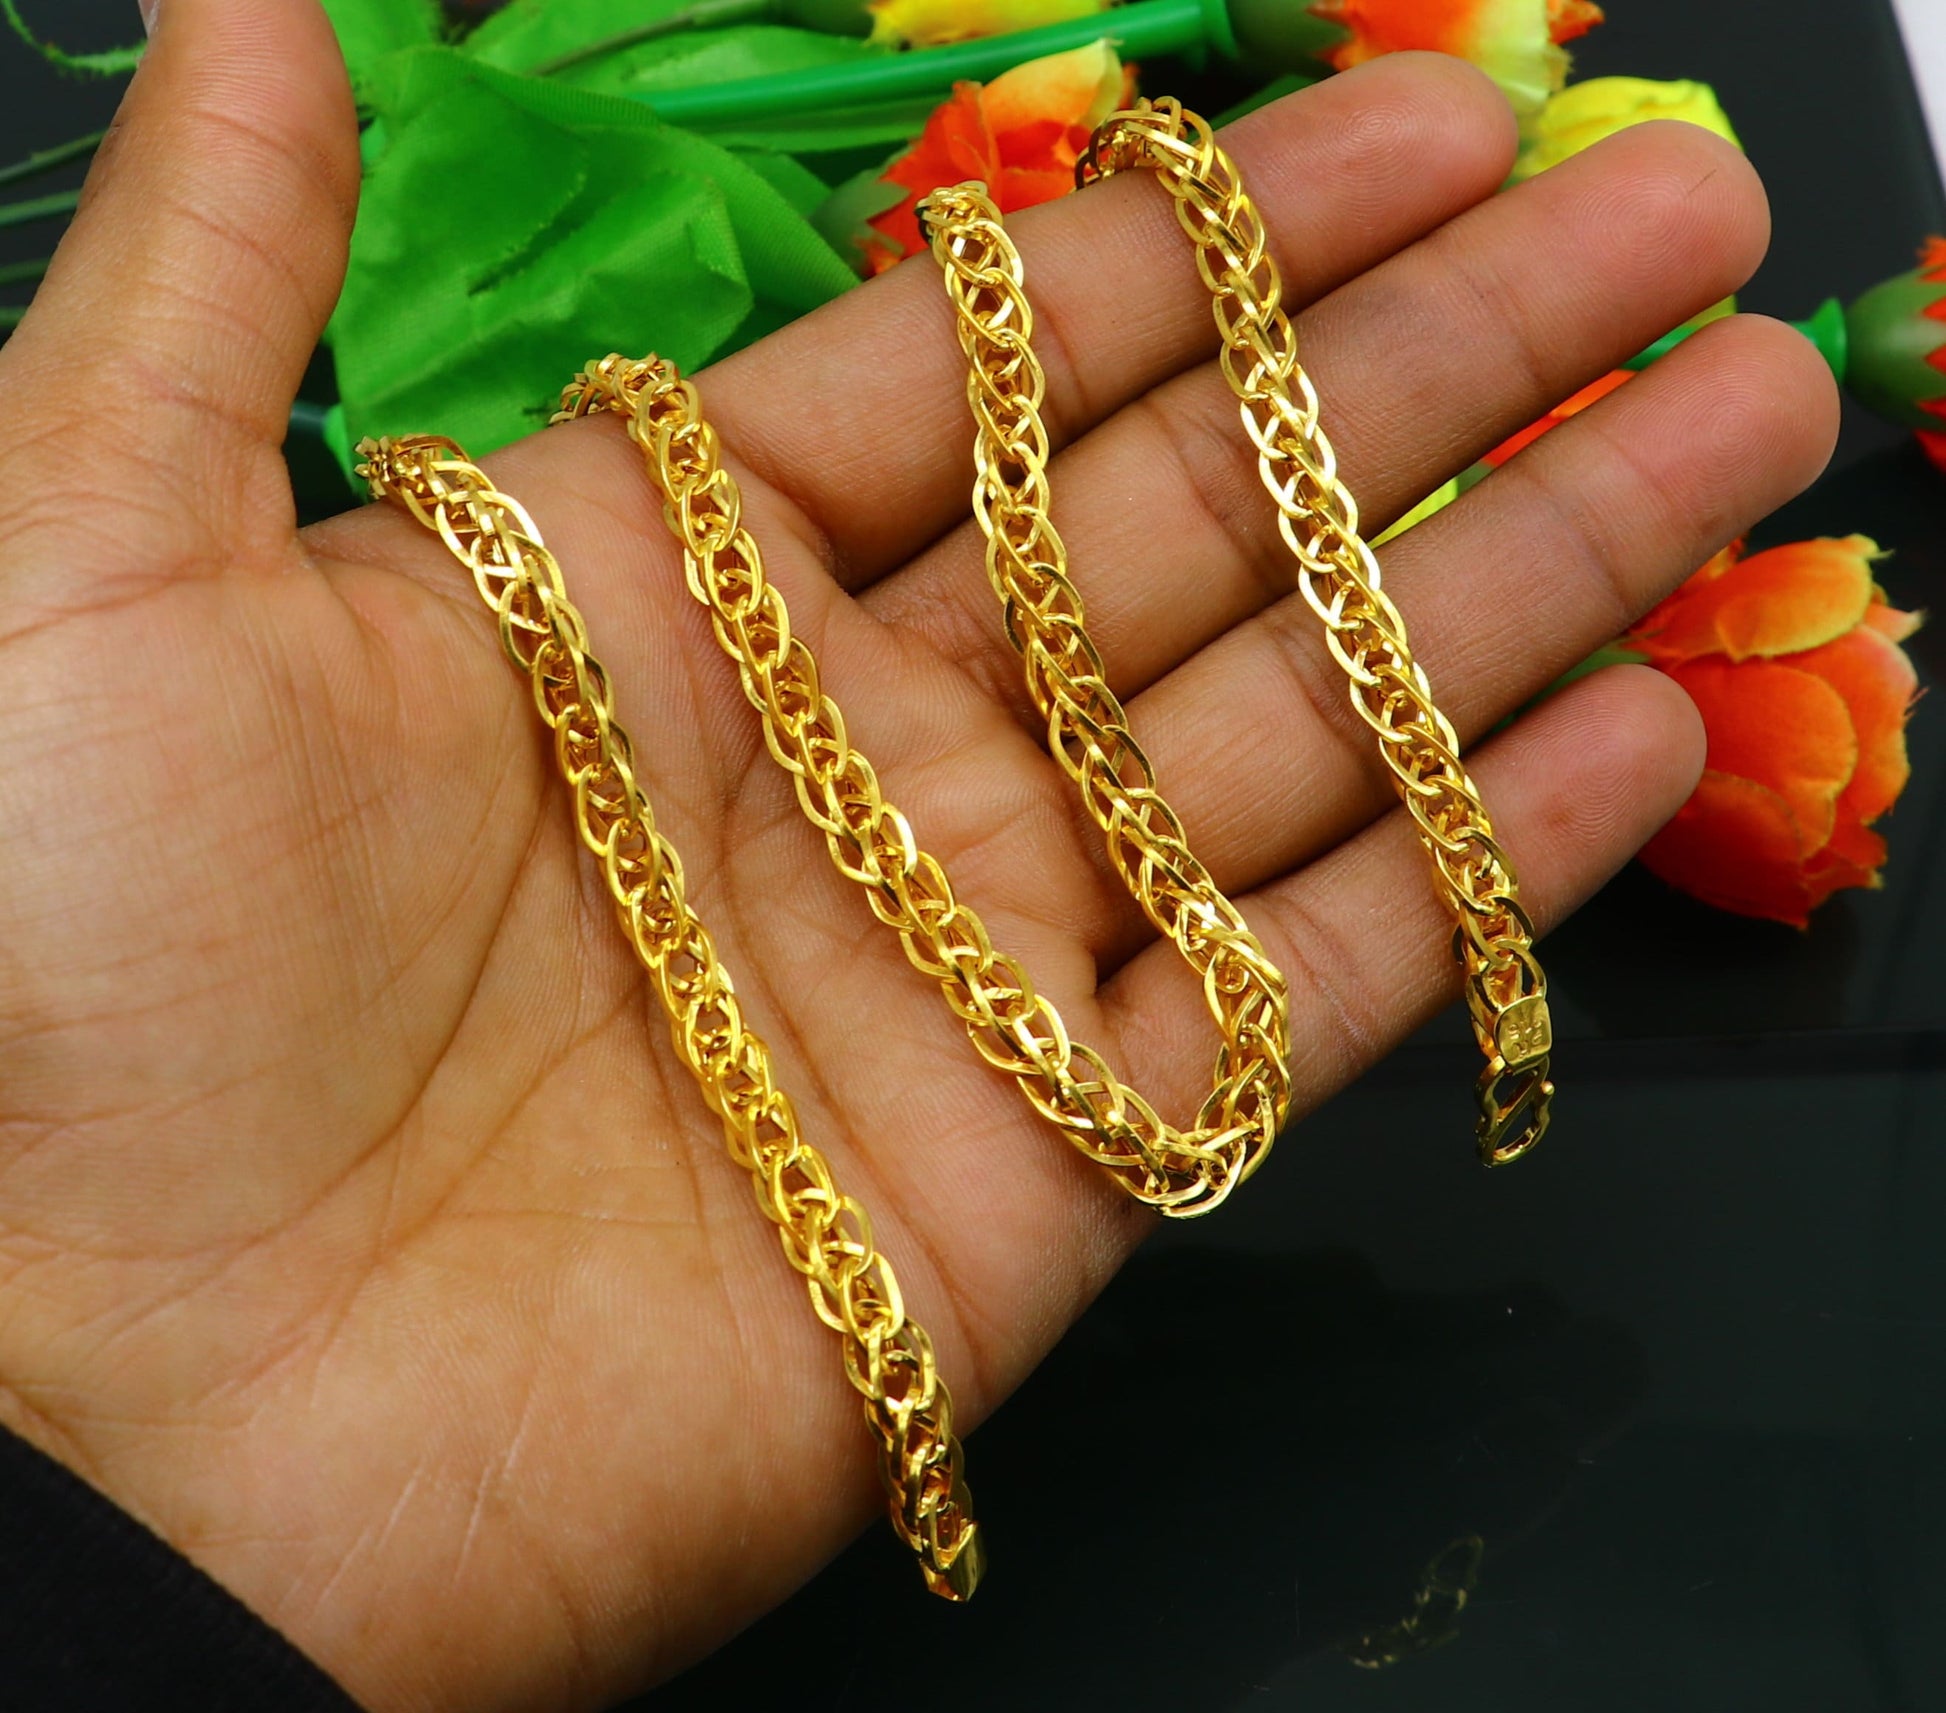 22karat yellow gold handmade unique design all sizes chain necklace amazing men's gifting wedding jewelry ch575 - TRIBAL ORNAMENTS